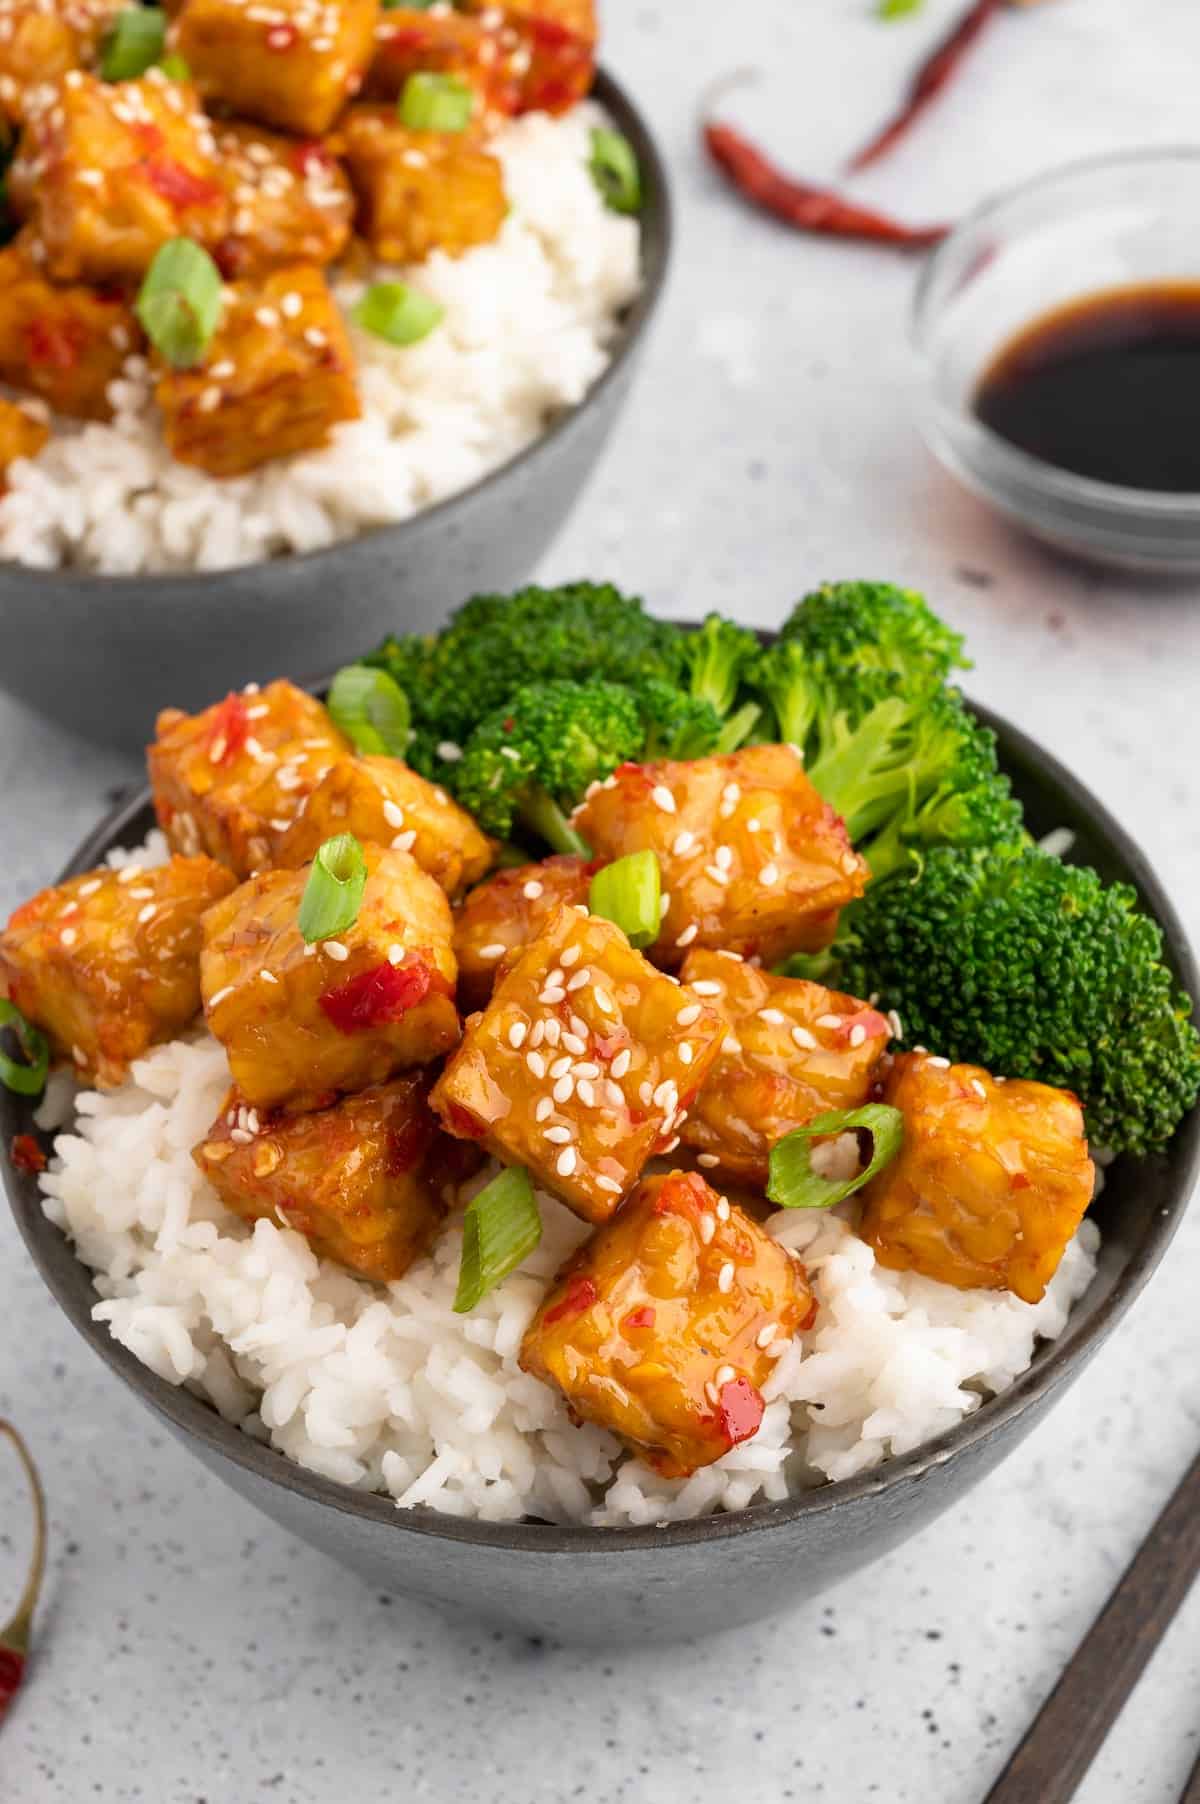 Air-fryer tempeh in a bowl with broccoli and rice.